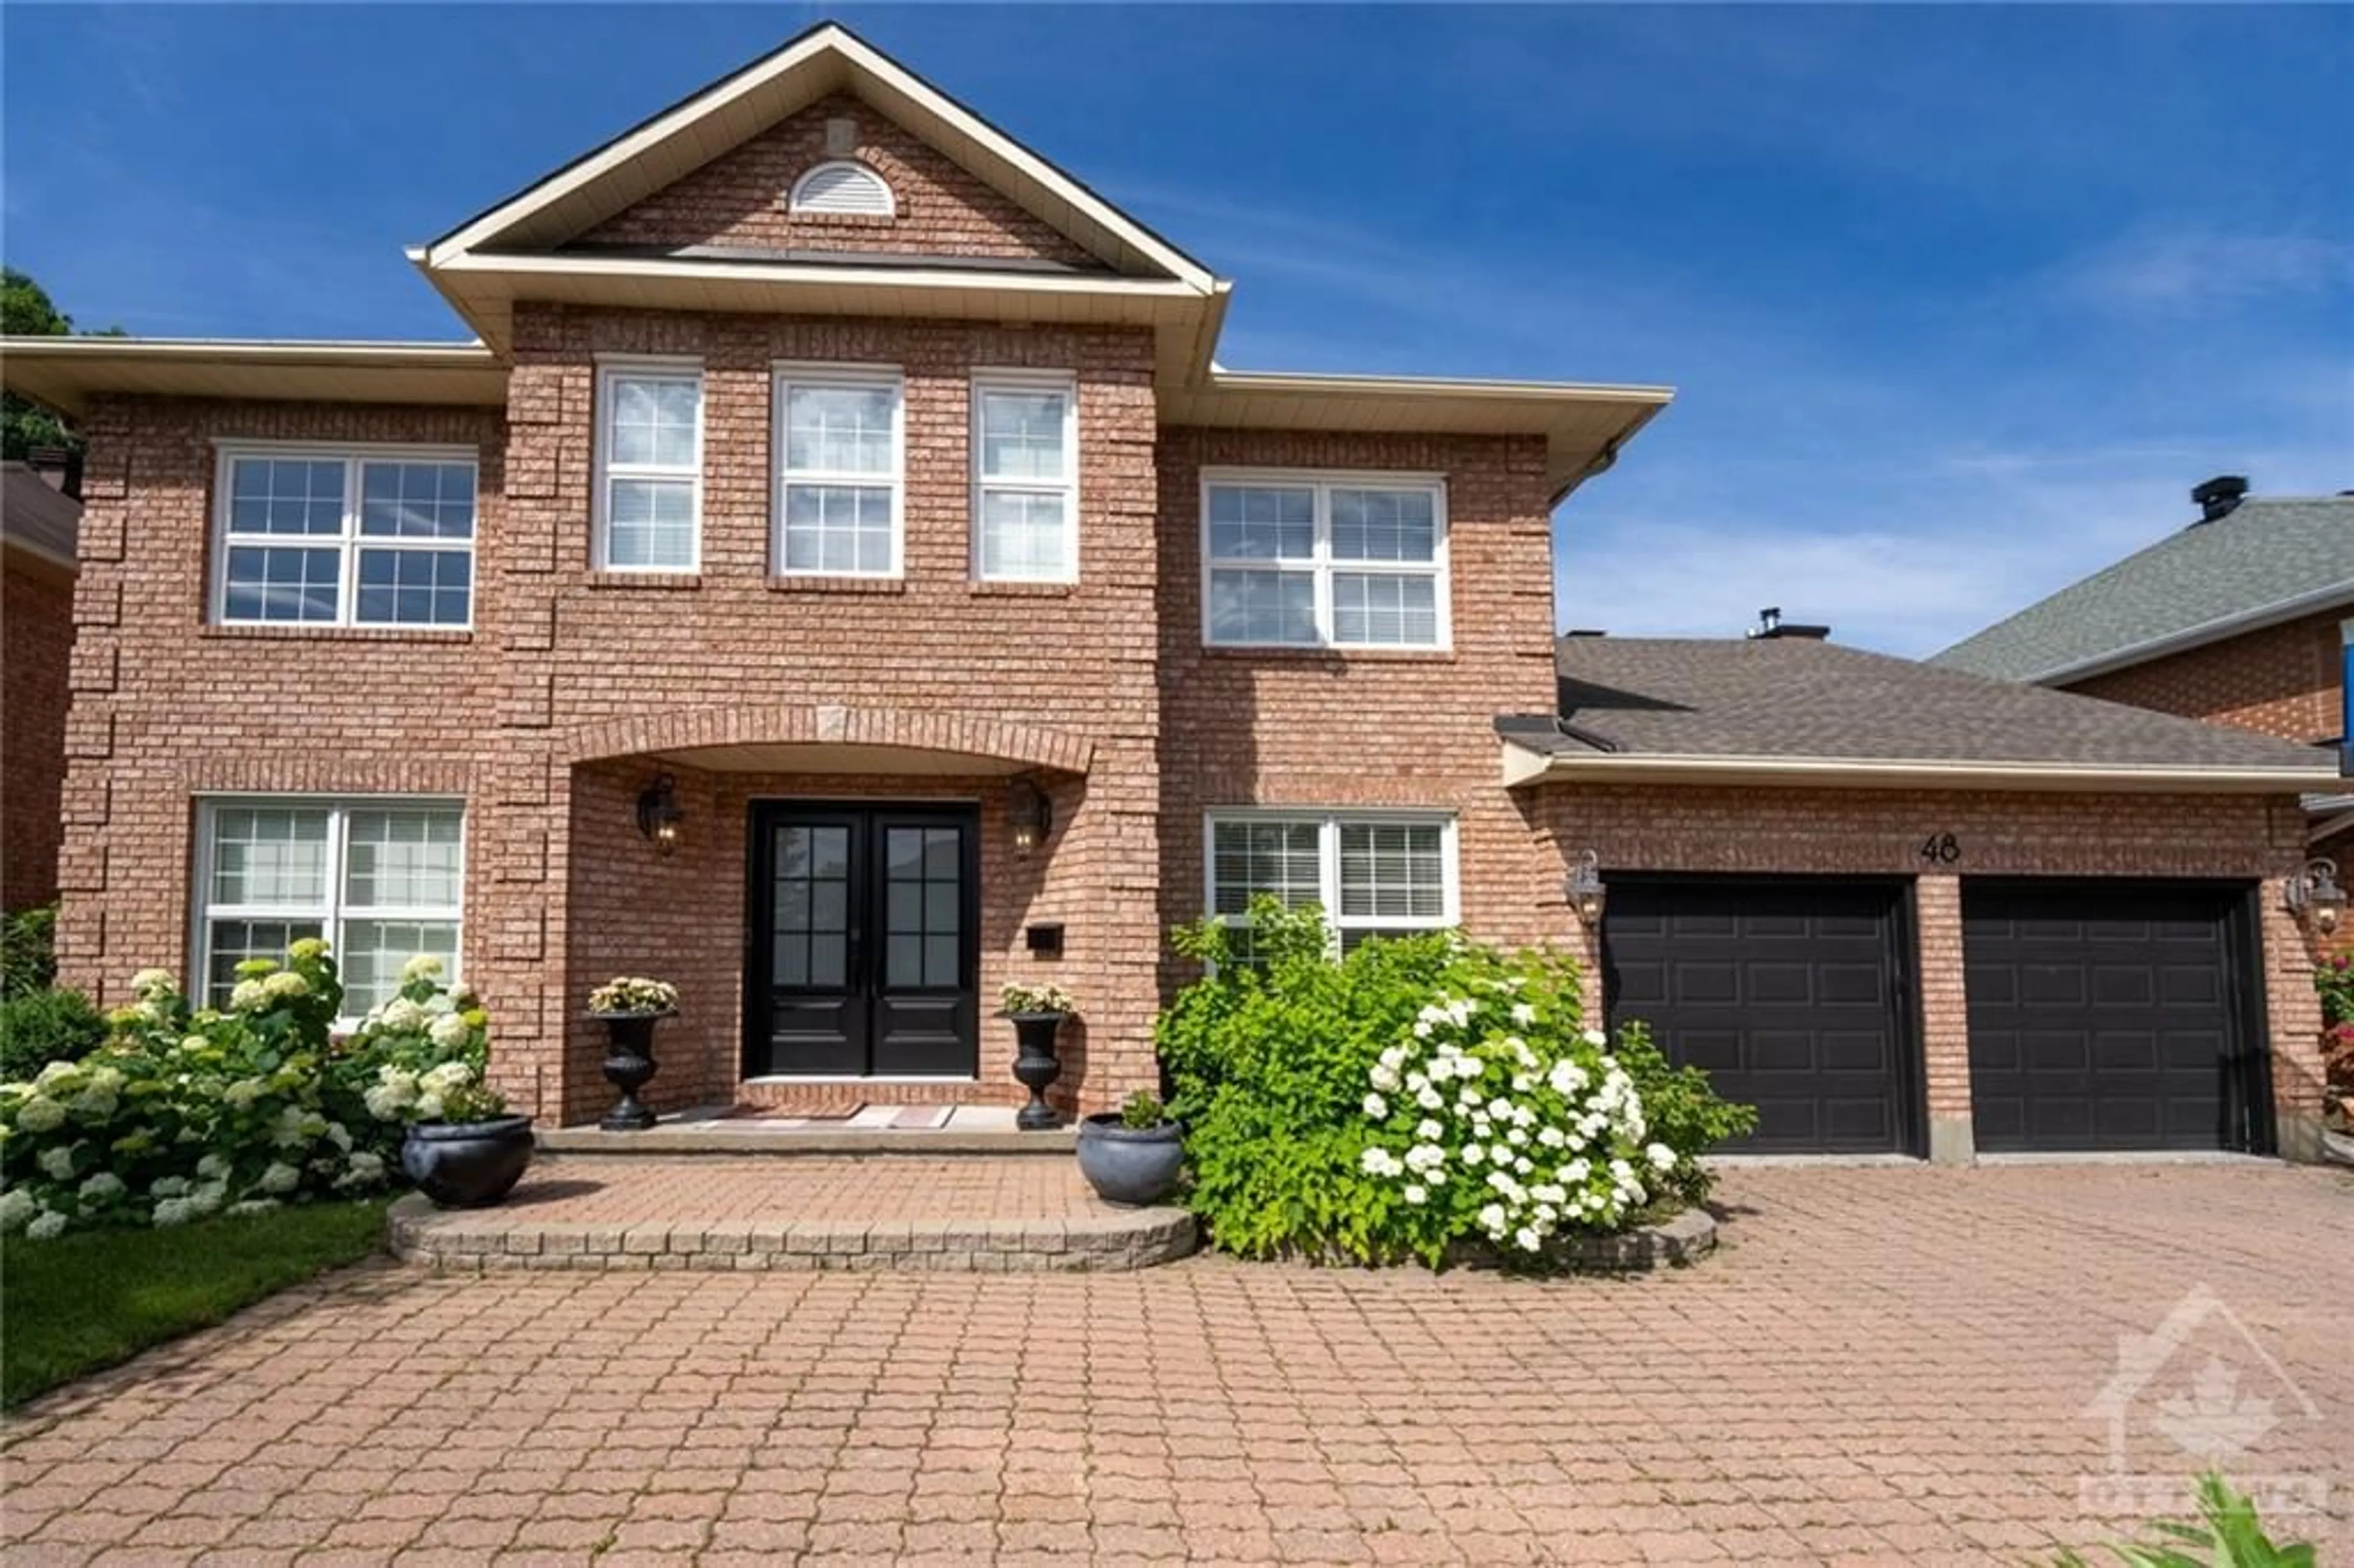 Home with brick exterior material for 48 MARBLE ARCH Cres, Ottawa Ontario K2G 5S6